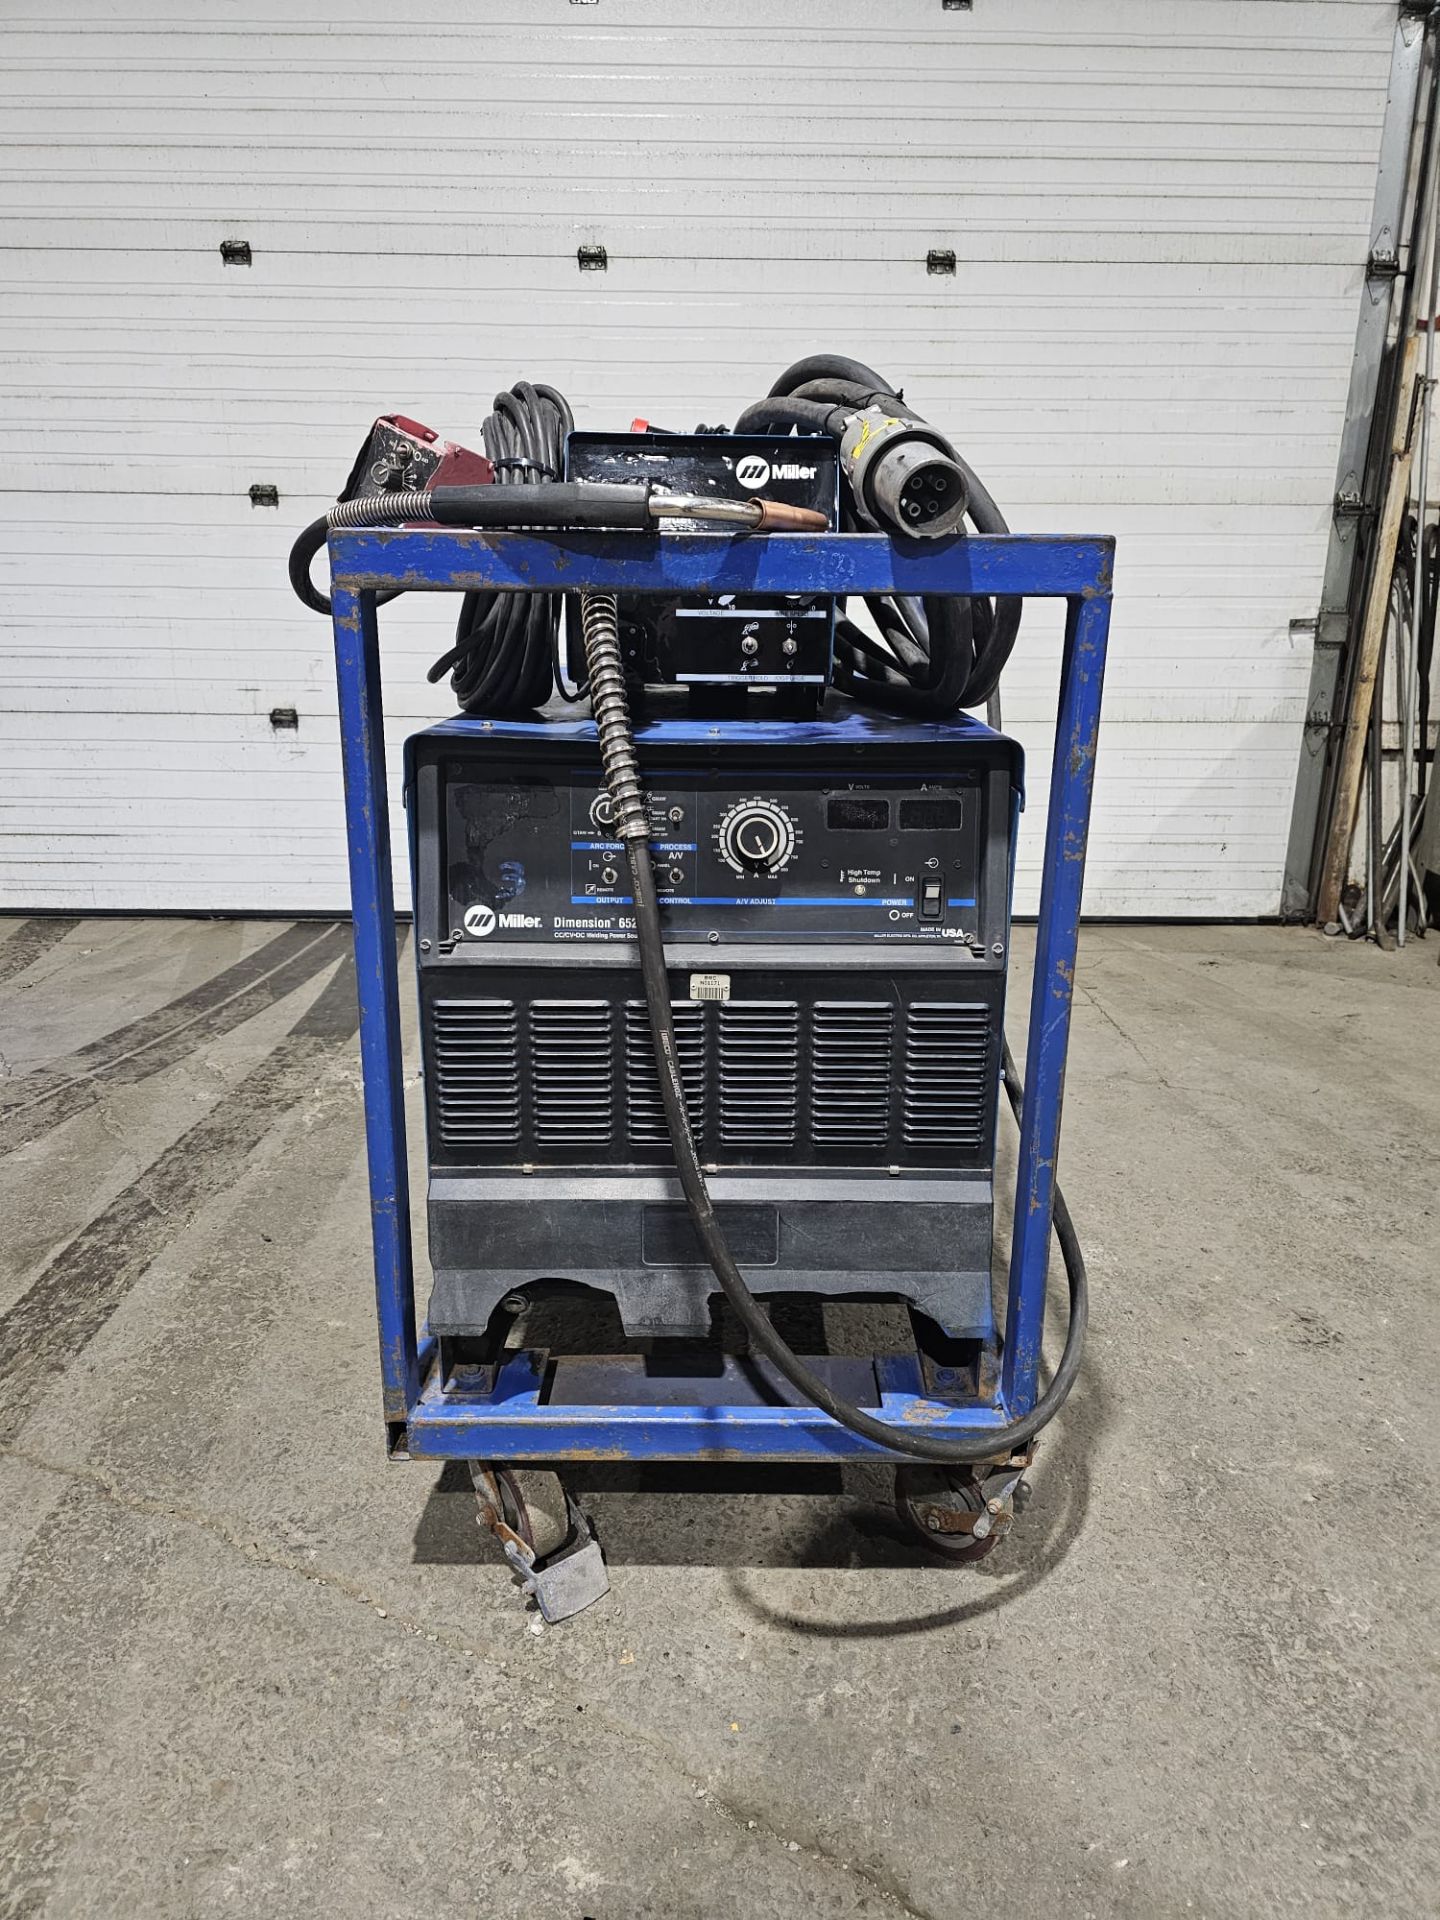 Miller Dimension 652 Mig Welder 650 Amp Mig Tig Stick Multi Process Power Source with 22A Wire